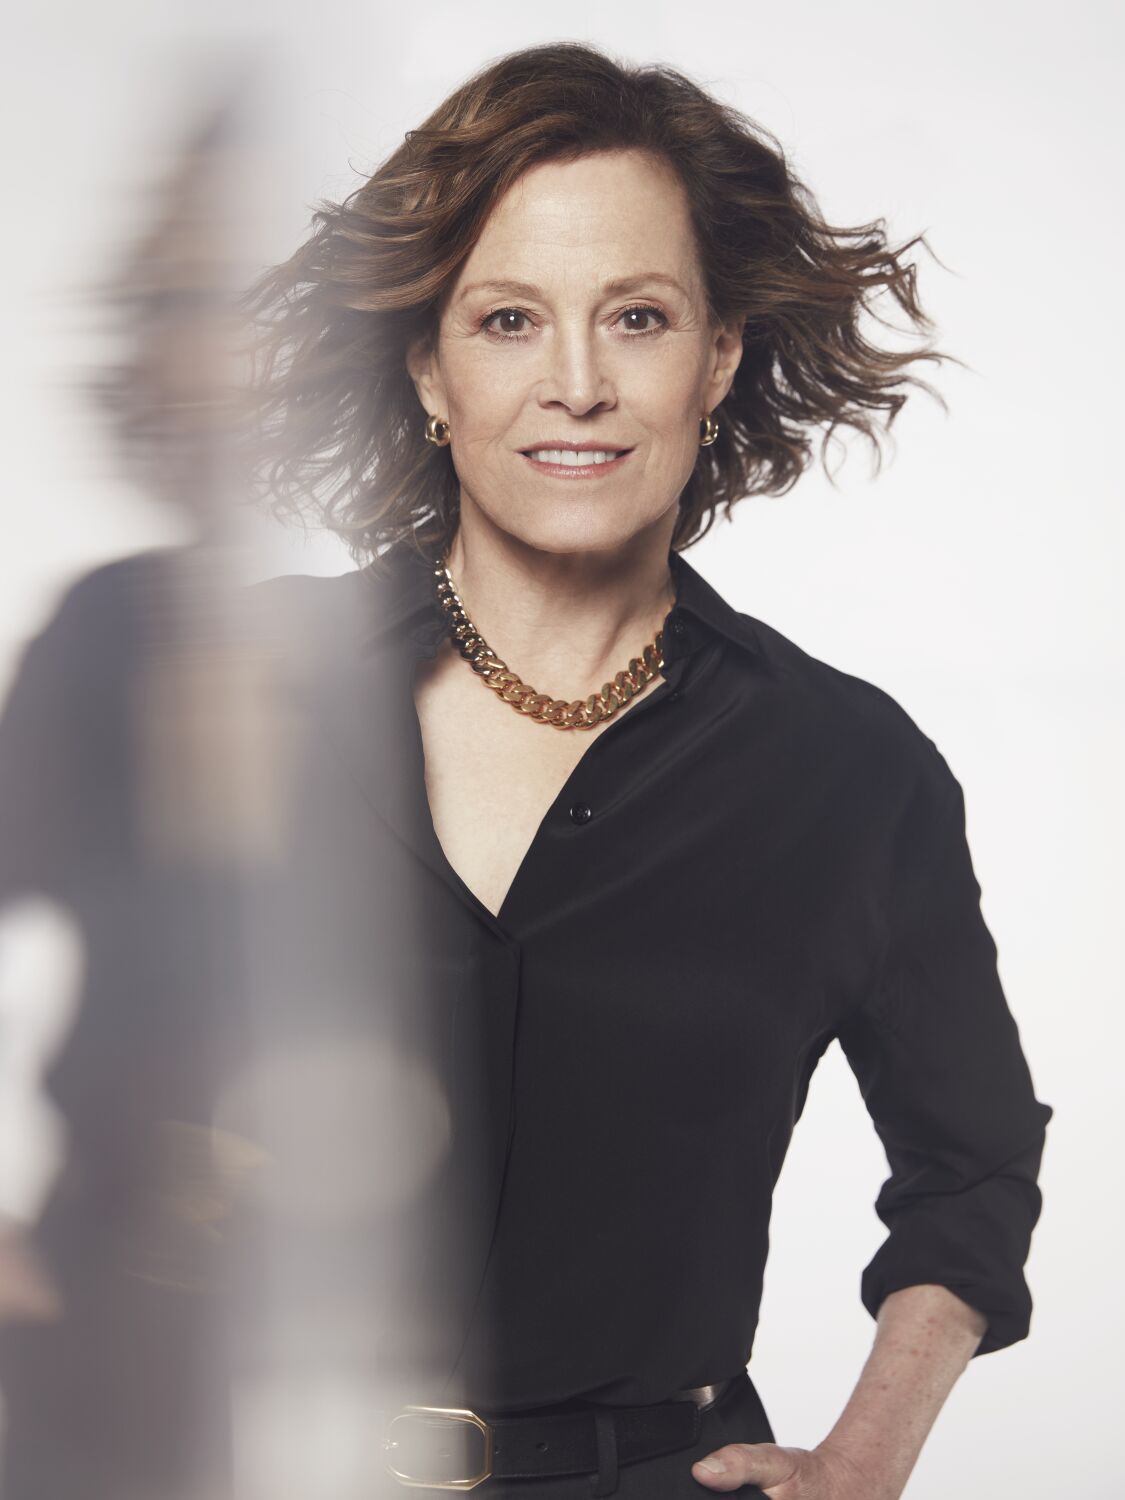 How Sigourney Weaver brings out her inner teen in the new 'Avatar'